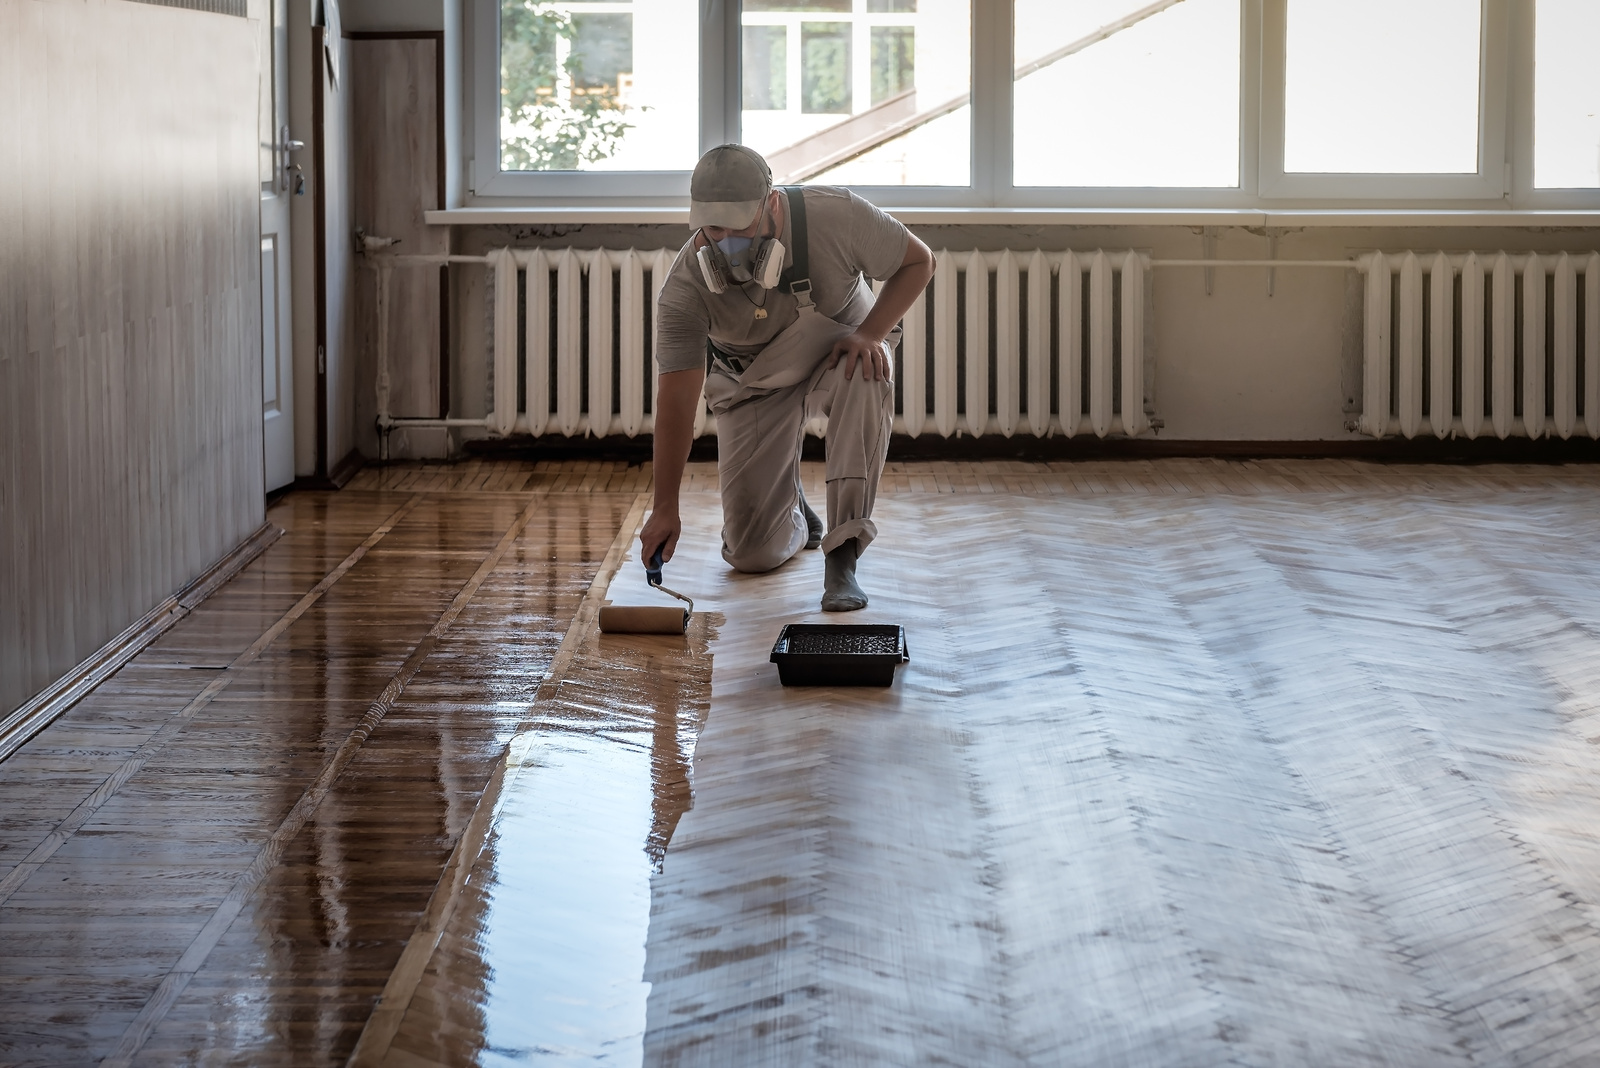 Lacquering parquet floors. Worker uses a roller to coating floors.